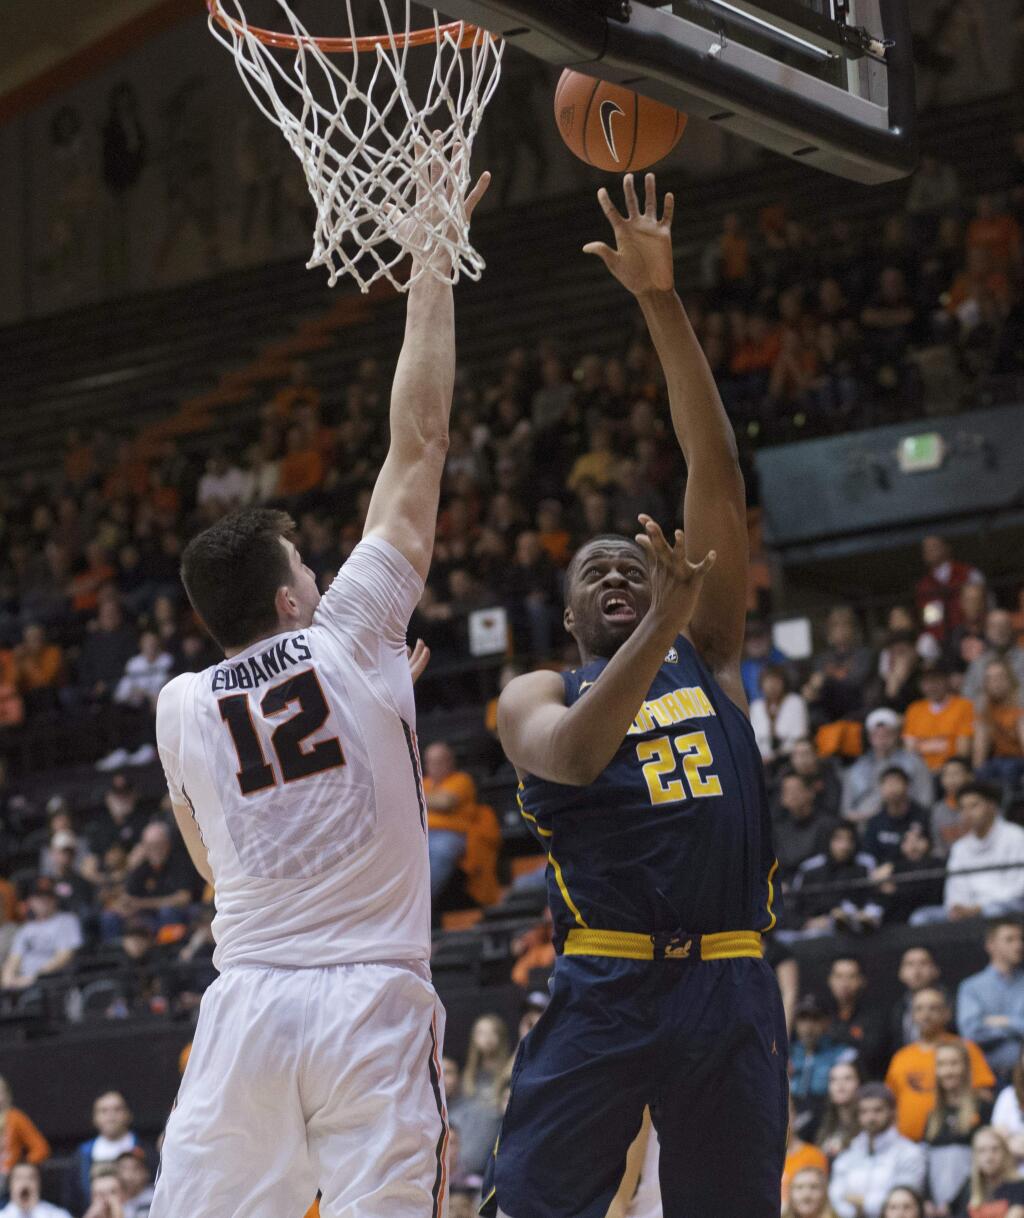 California's Kingsley Okoroh (22) gets a shot off while being guarded by Oregon State's Drew Eubanks (12) during the first half of an NCAA college basketball game in Corvallis, Ore., Saturday, Jan. 21, 2017. (AP Photo/Timothy J. Gonzalez)